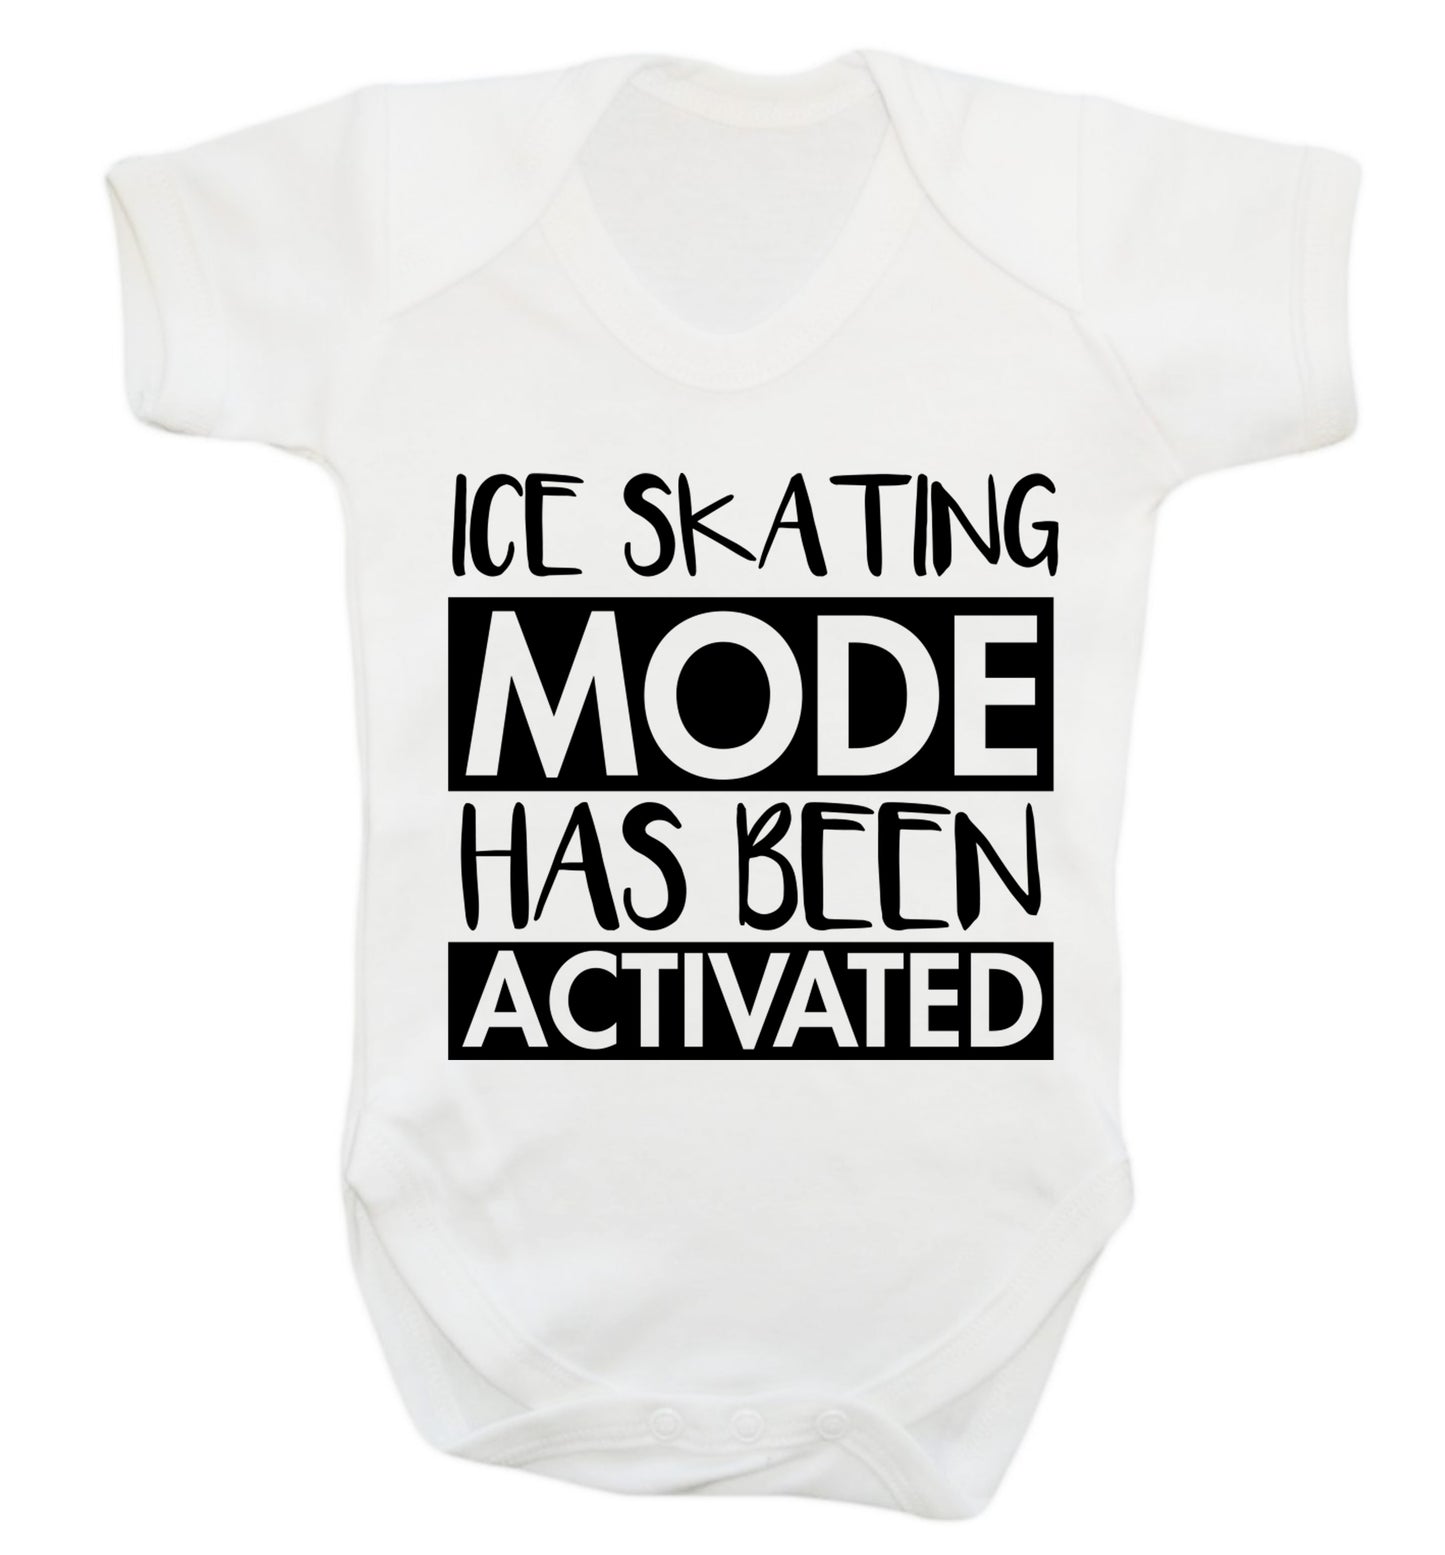 Ice skating mode activated Baby Vest white 18-24 months